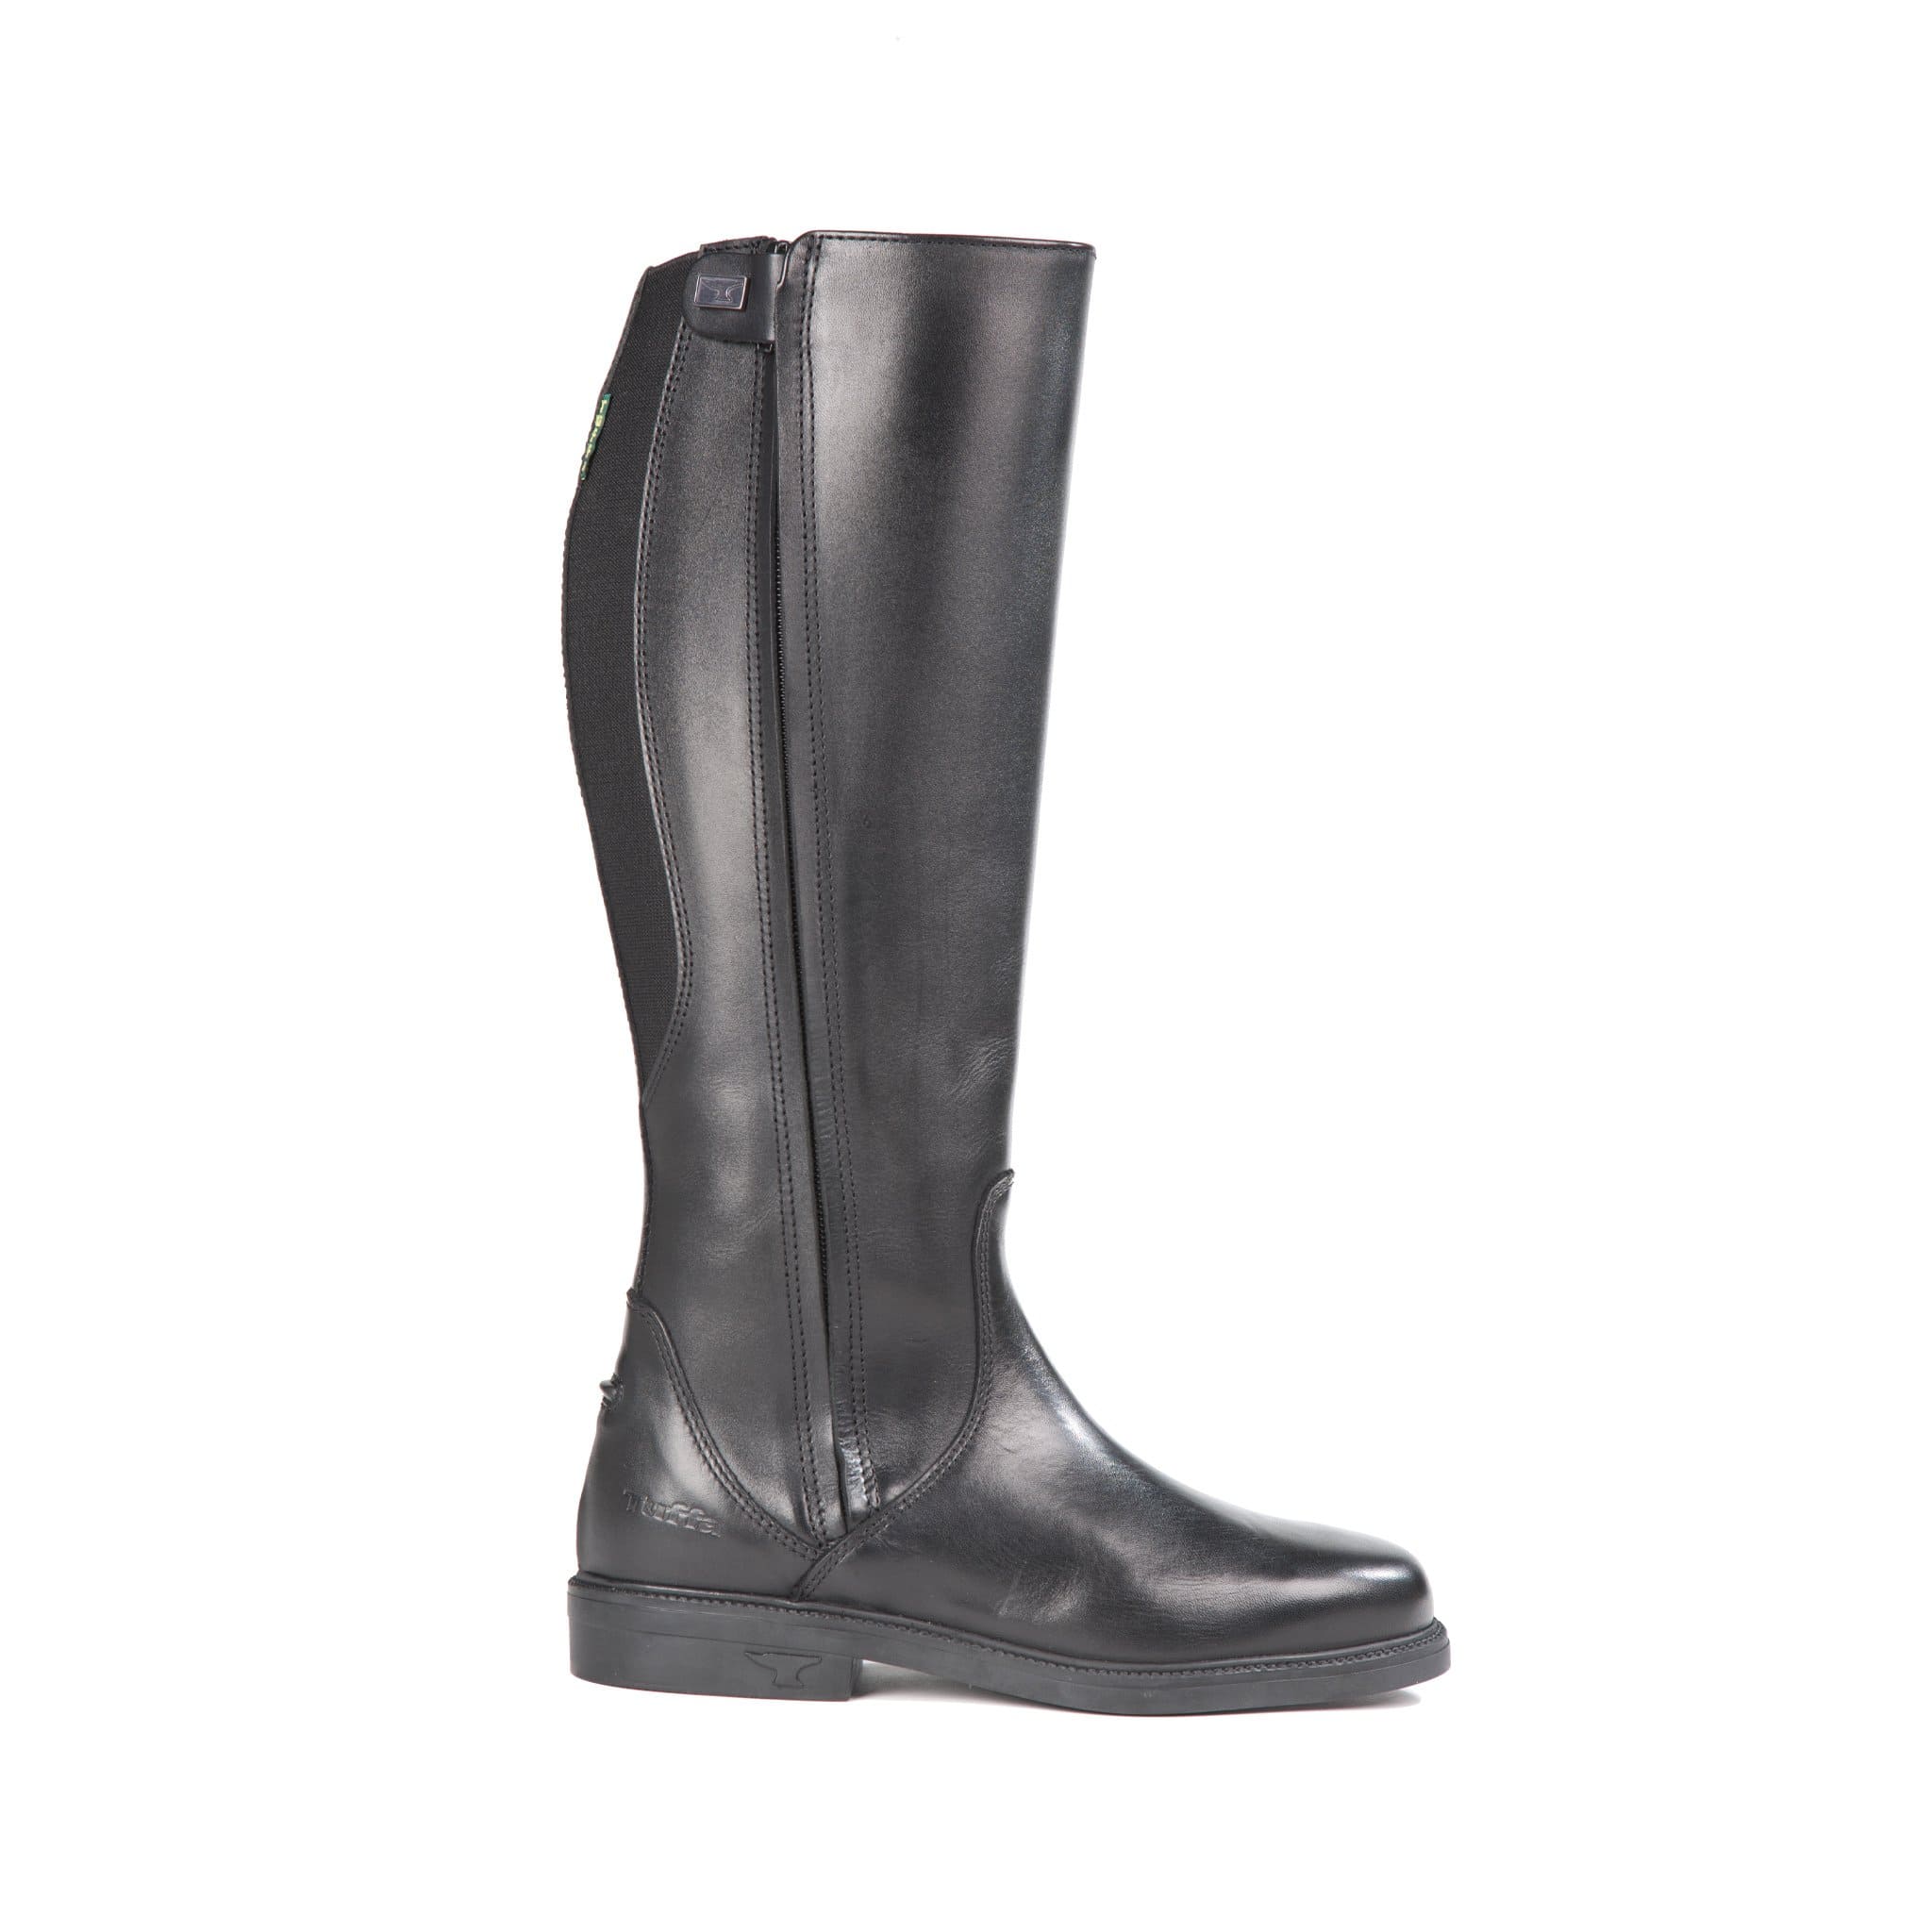 BRECK Tuffa Breckland Plus Size Leather Long Riding Boots